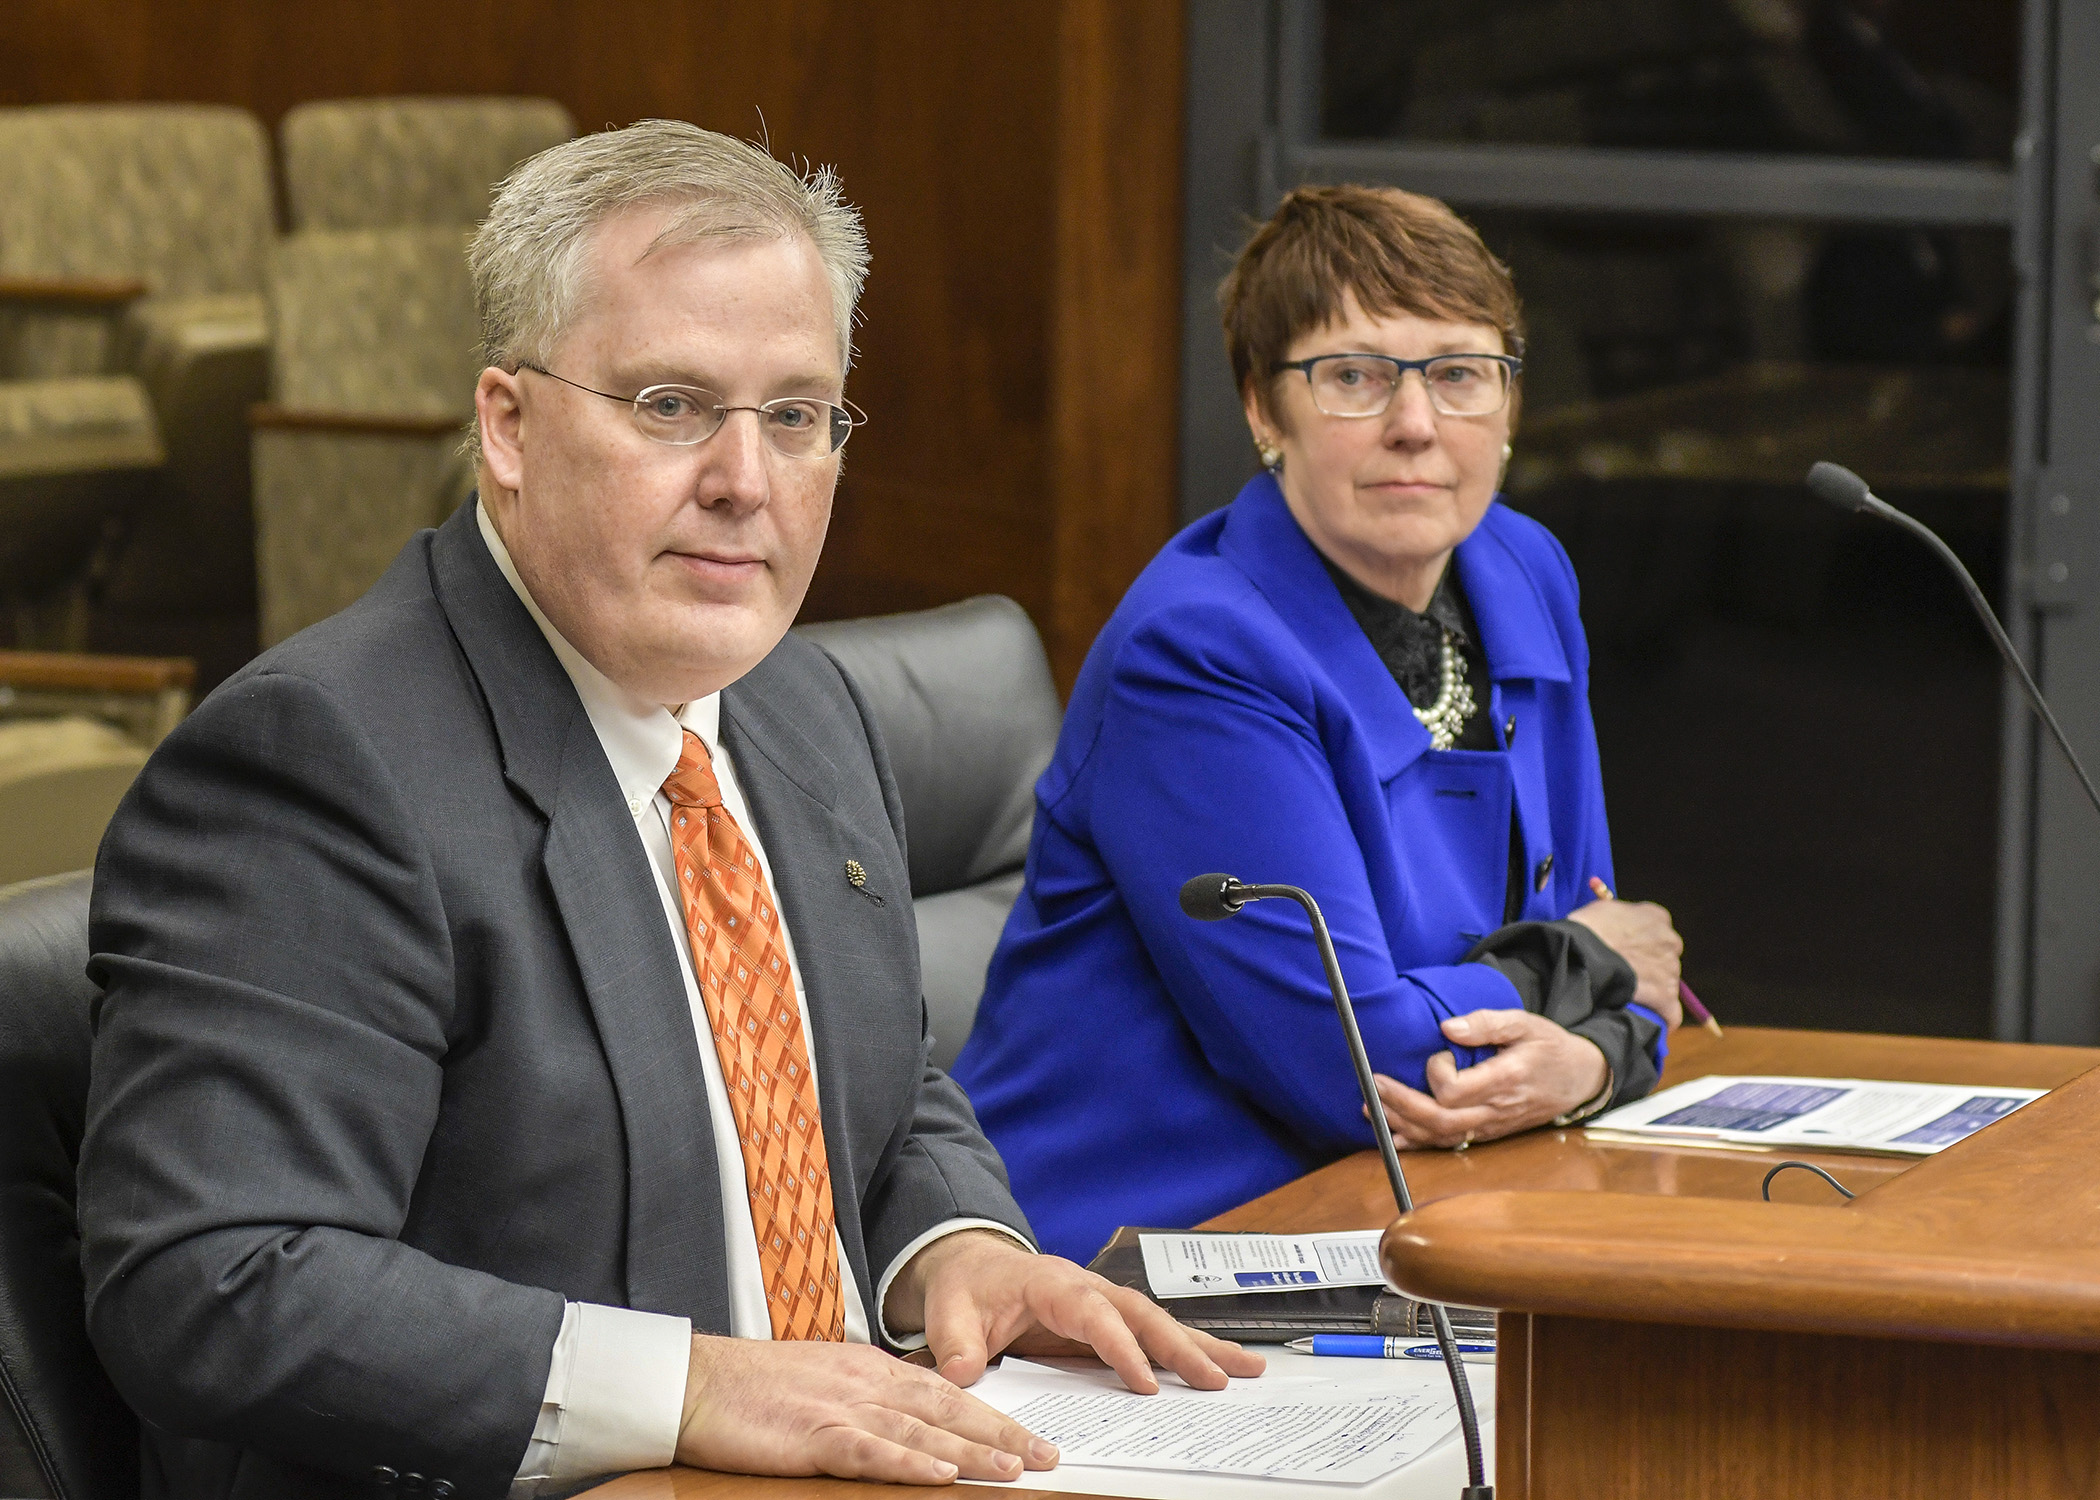 Austin City Administrator Craig Clark testifies before a House division Feb. 13 in support of a bill sponsored by Rep. Jeanne Poppe, right, that would provide clean water funding. Photo by Andrew VonBank